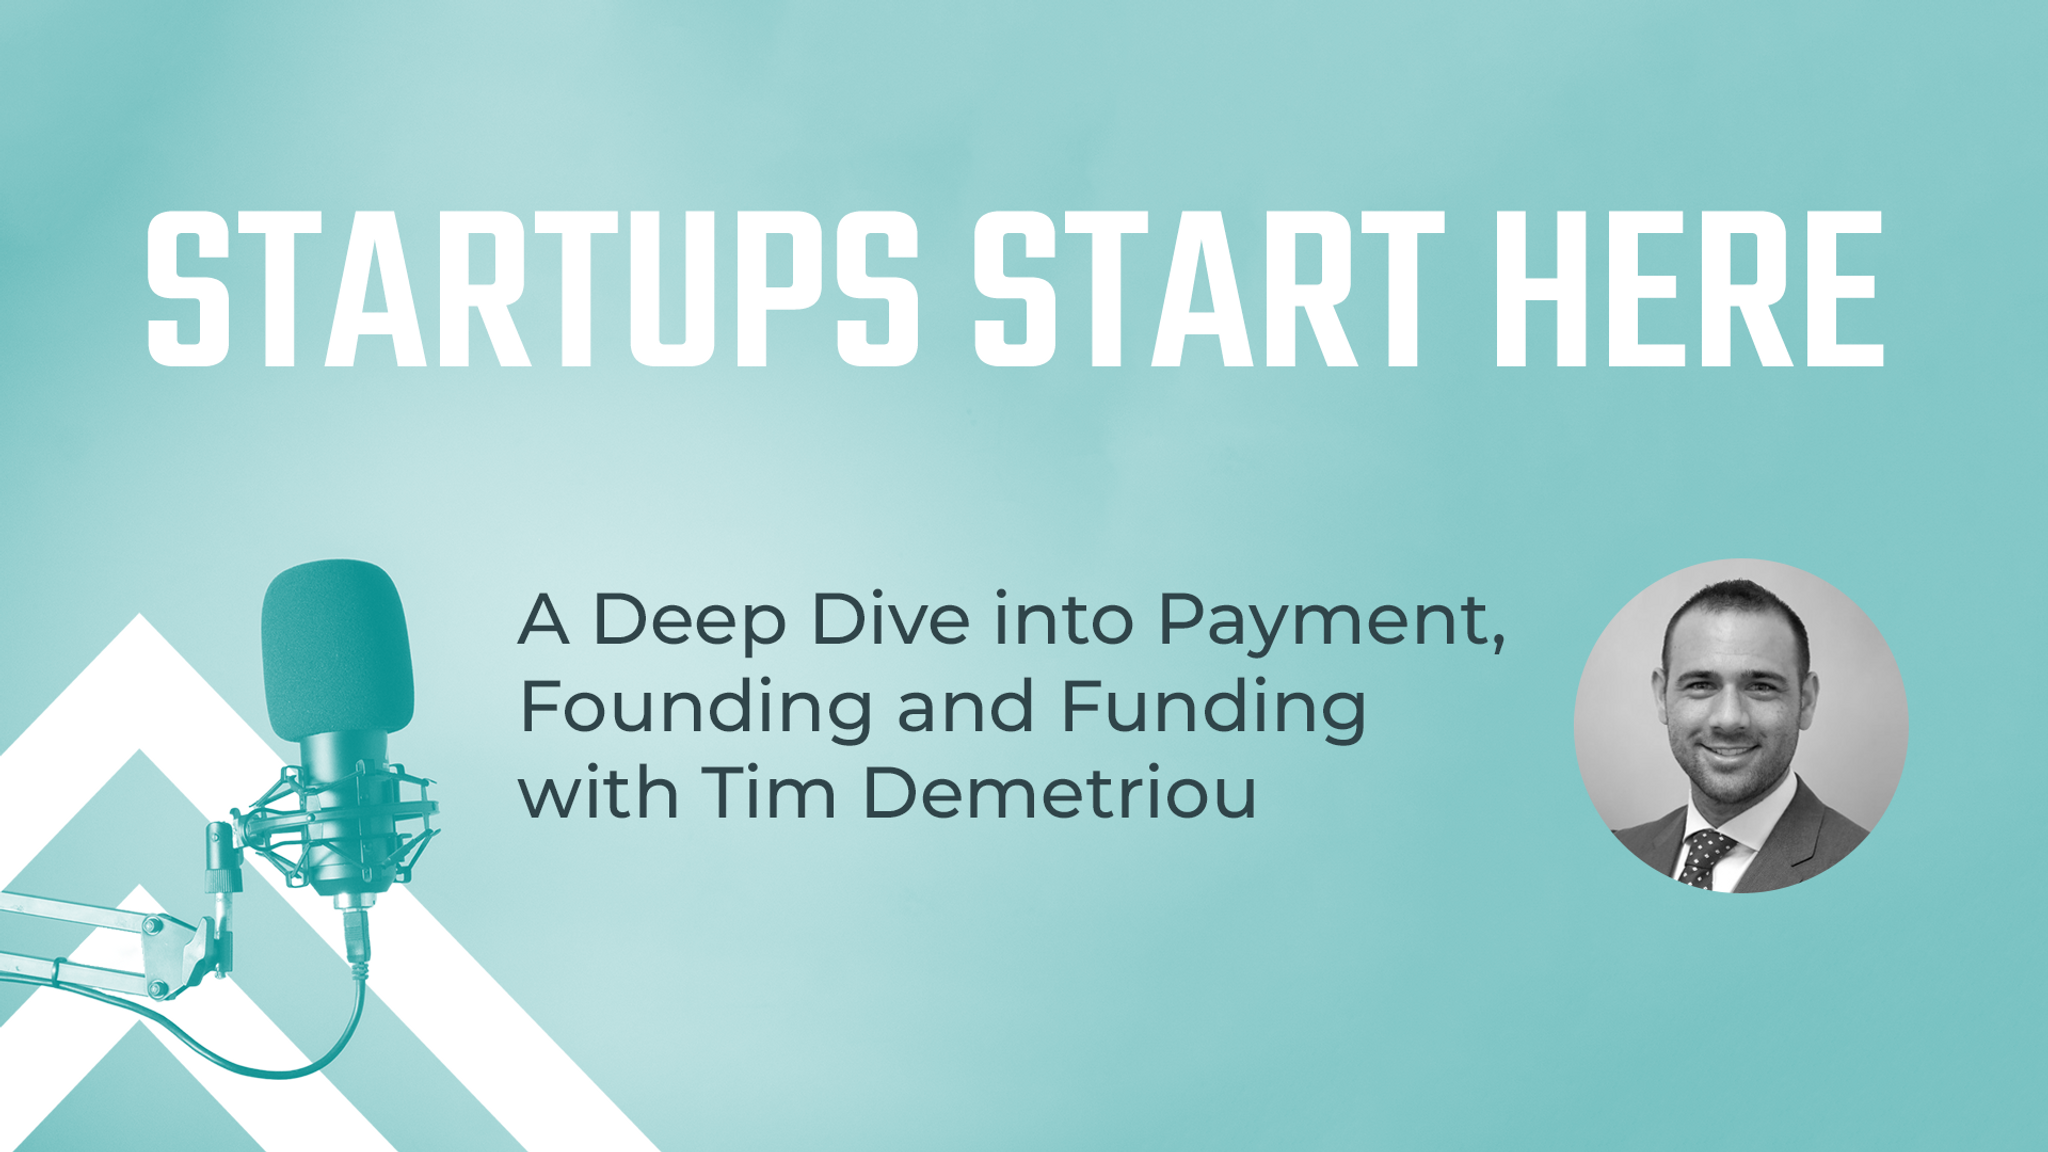 Take a listen to Episode 4: A Deep Dive into Payment, Founding and Funding with Tim Demetriou